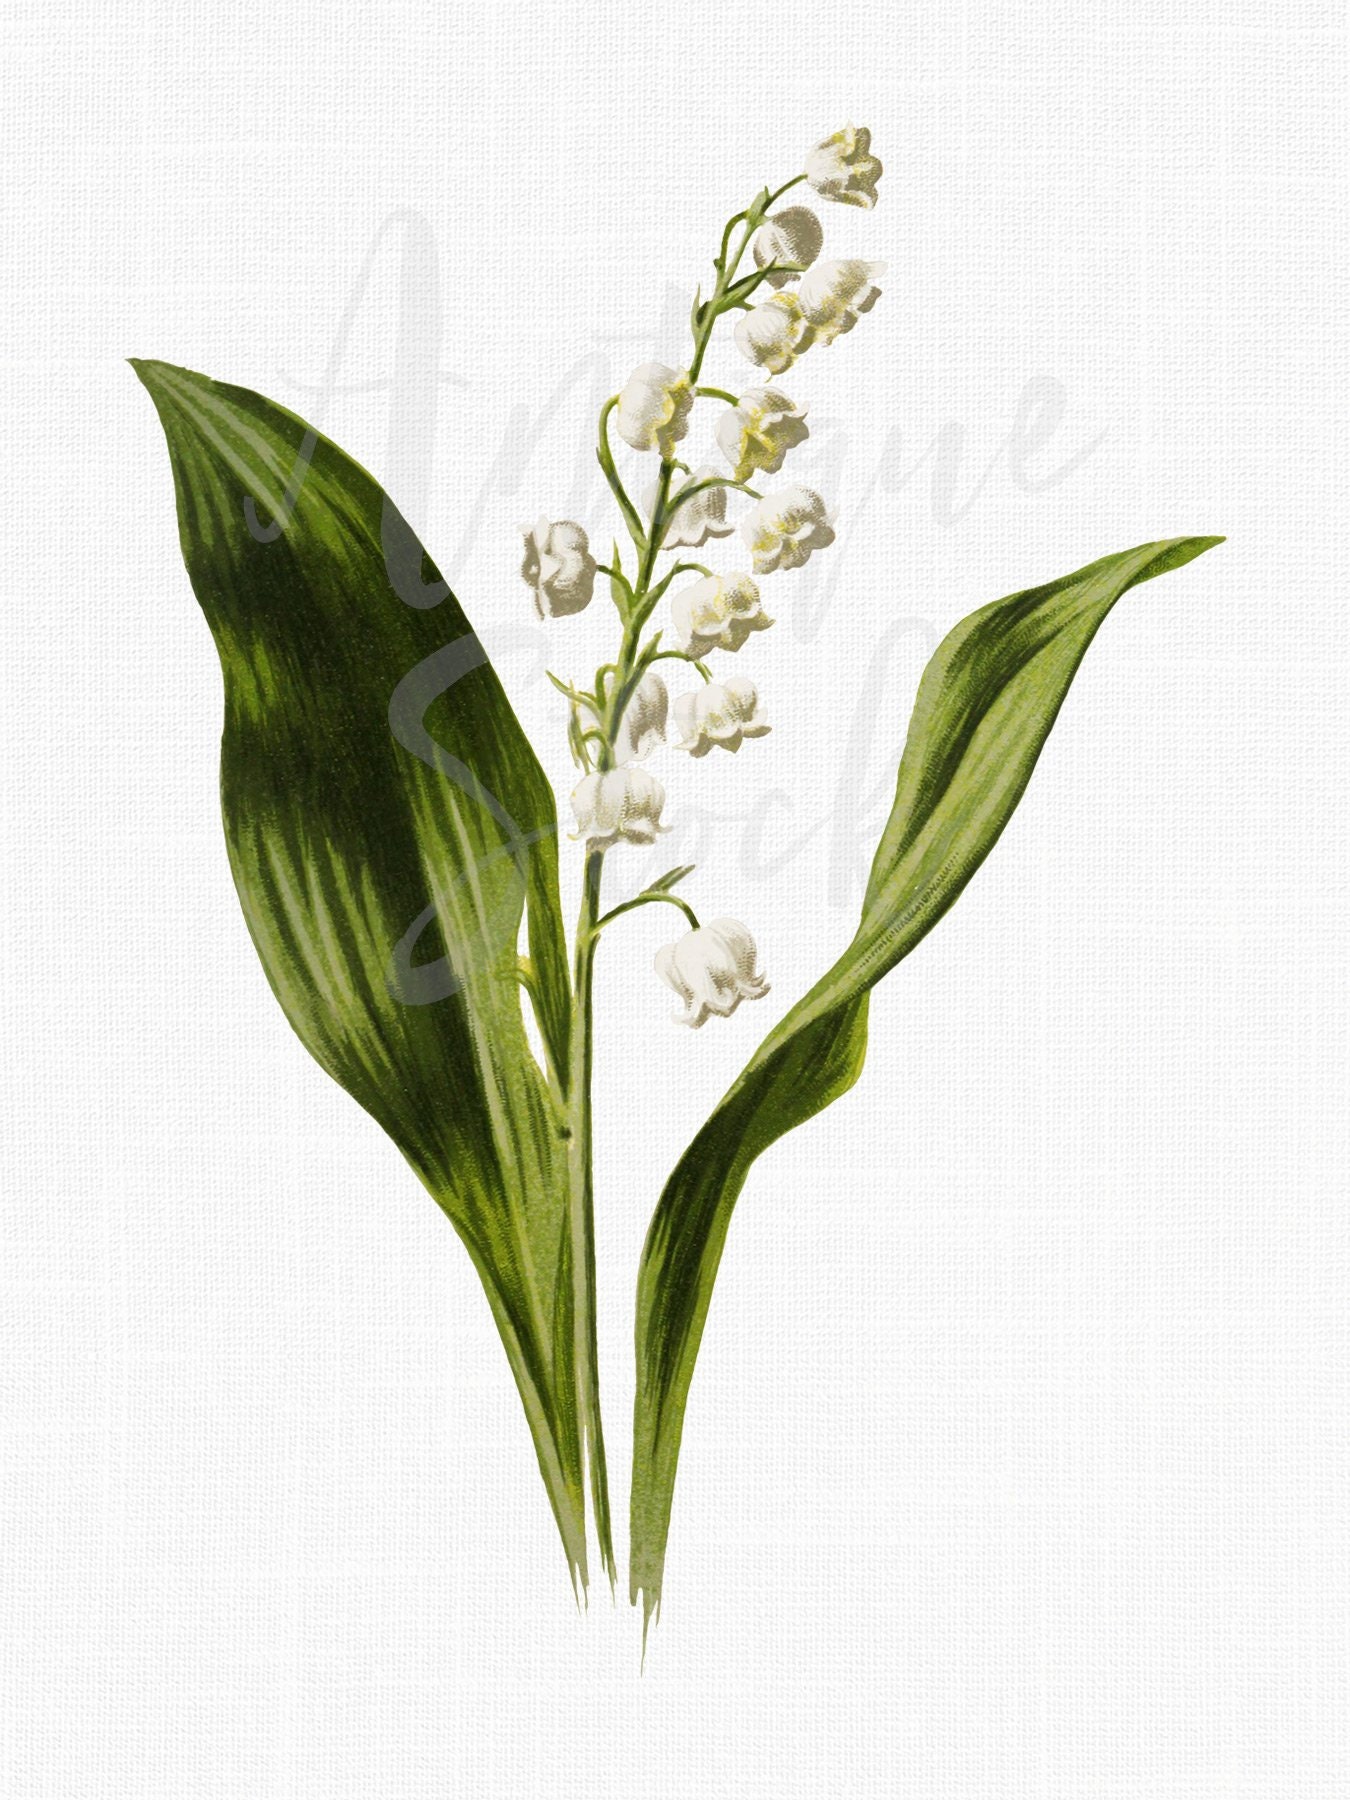 Lily of the Valley Art Print – The Illustrated Life